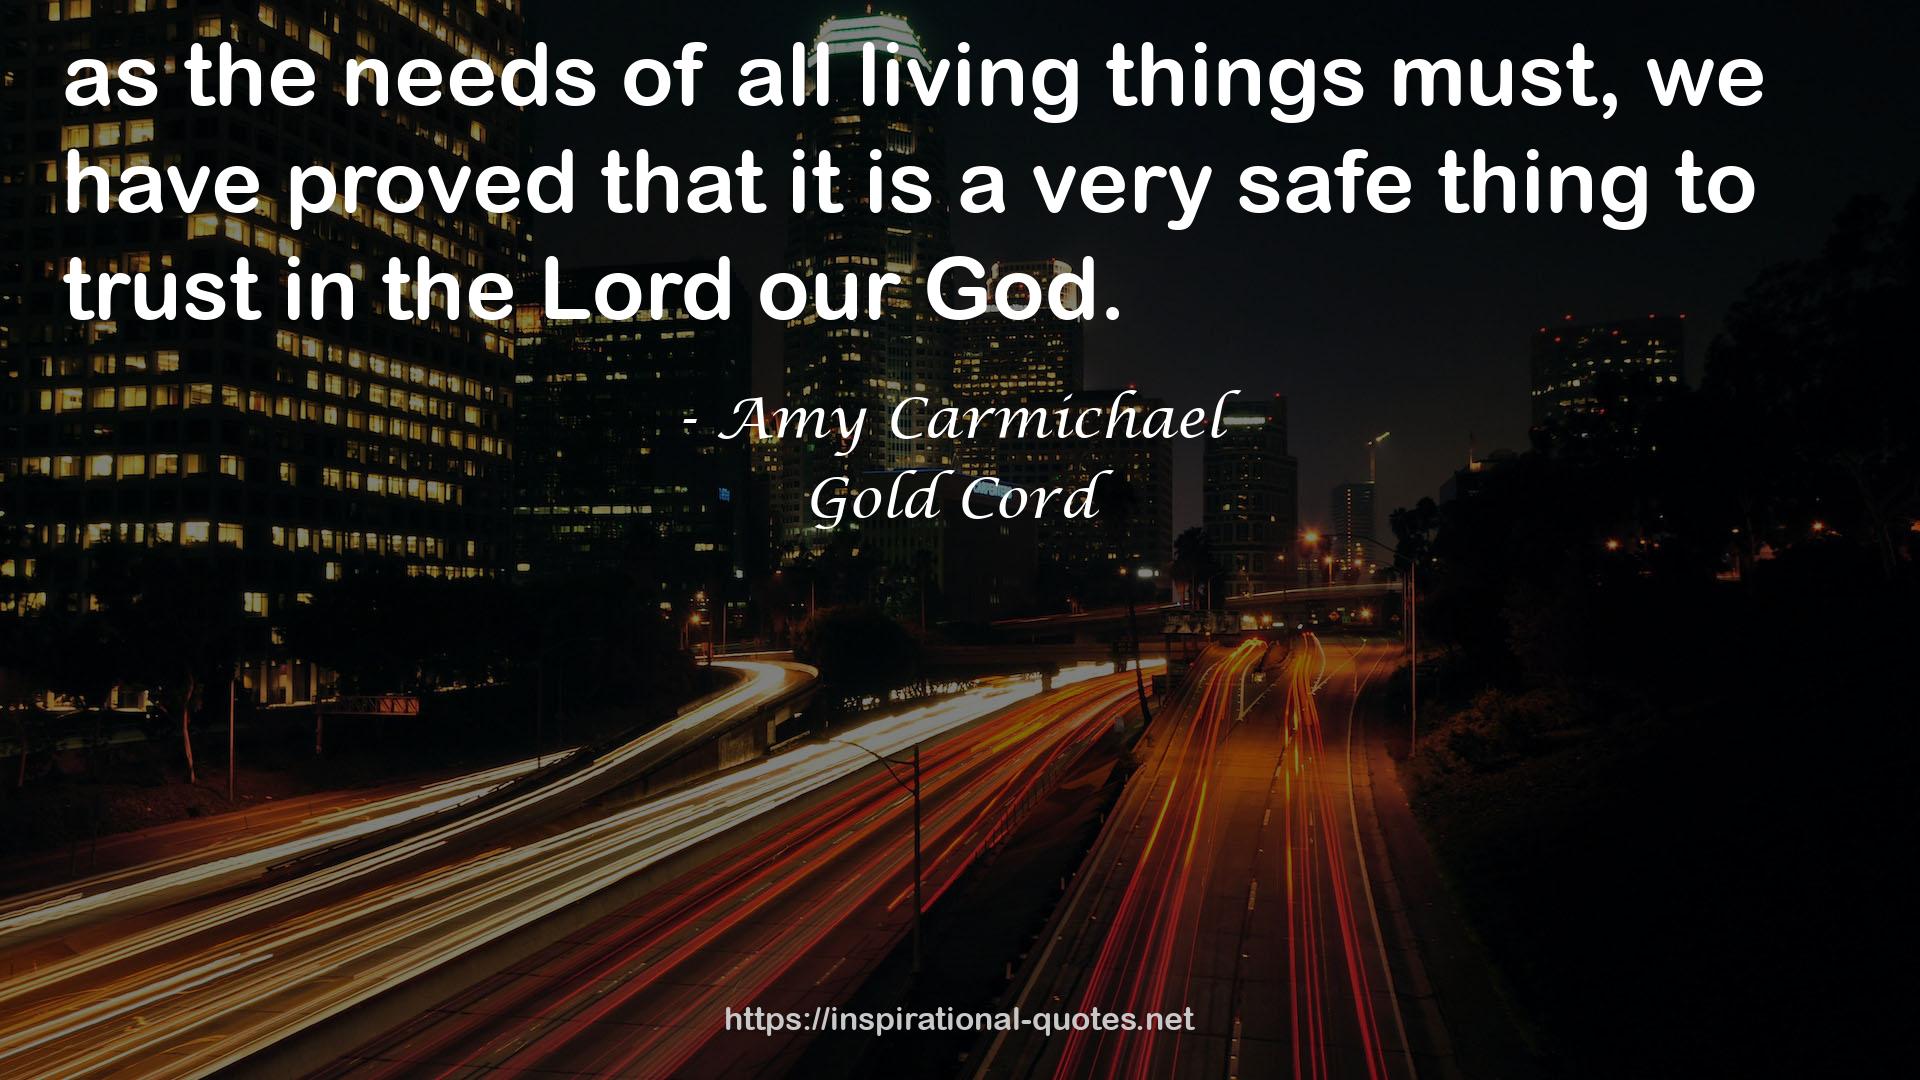 Gold Cord QUOTES